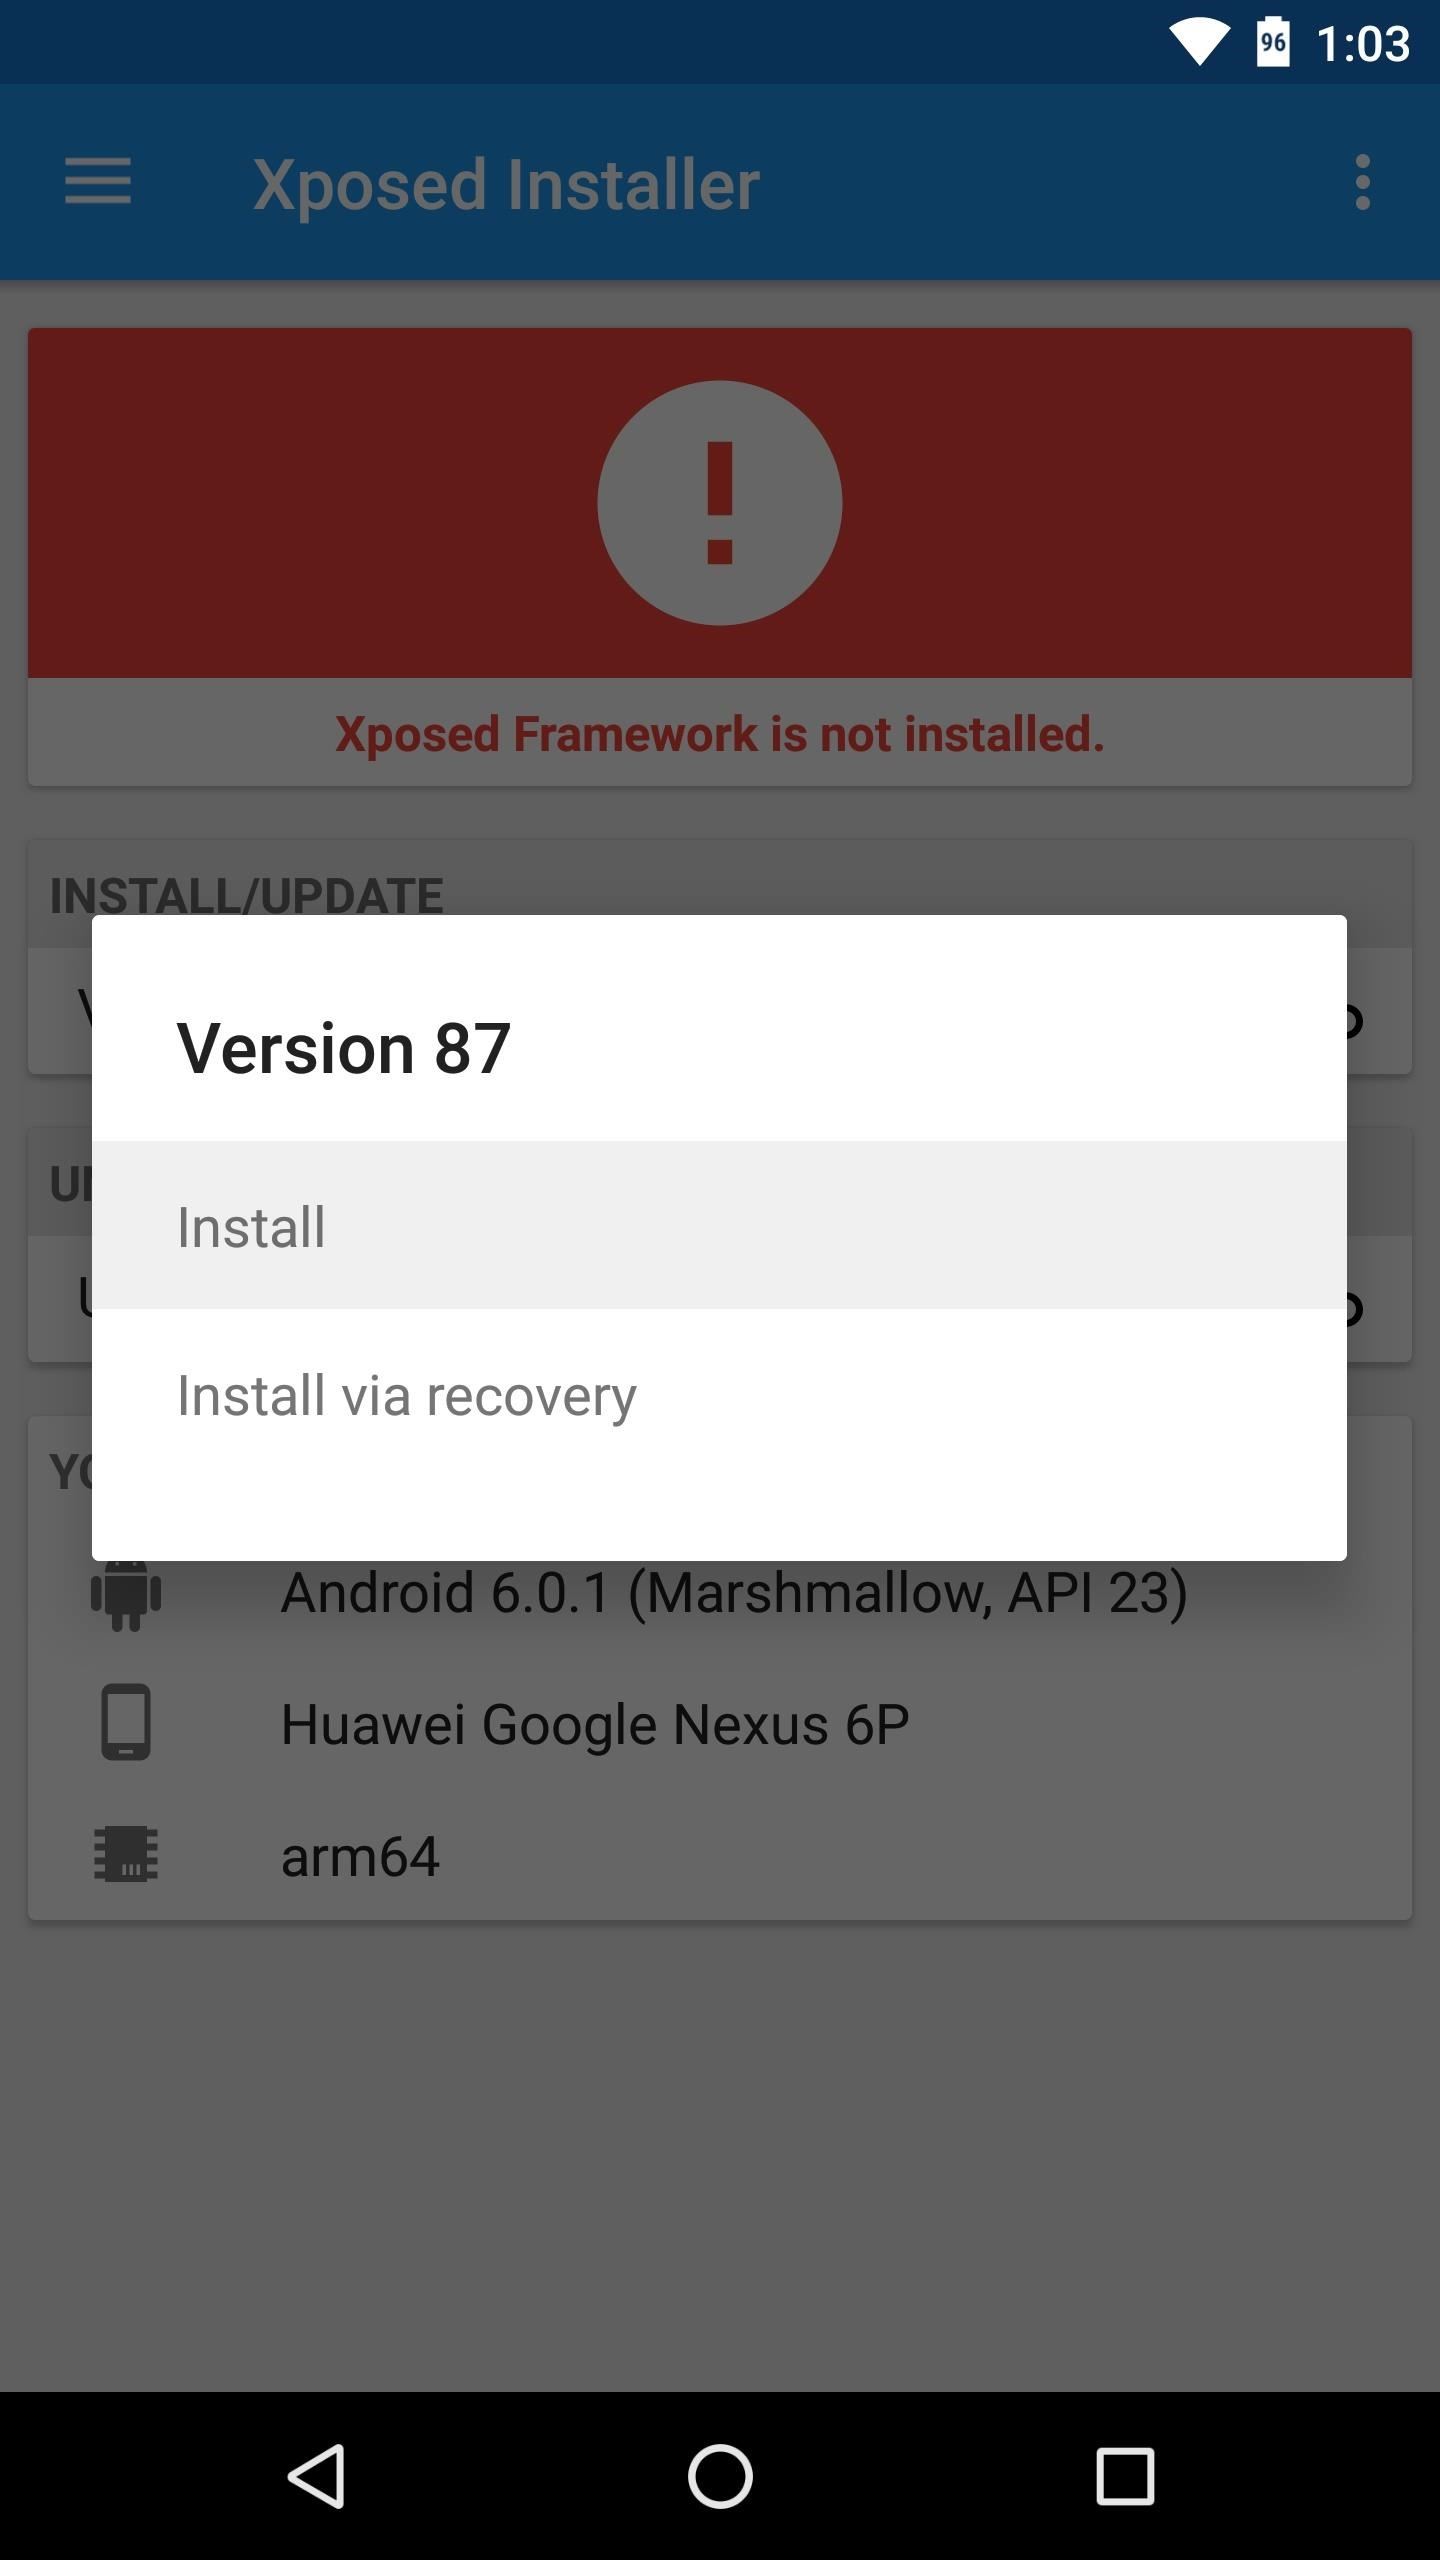 Xposed 101: How to Install the Xposed Framework on Lollipop or Marshmallow